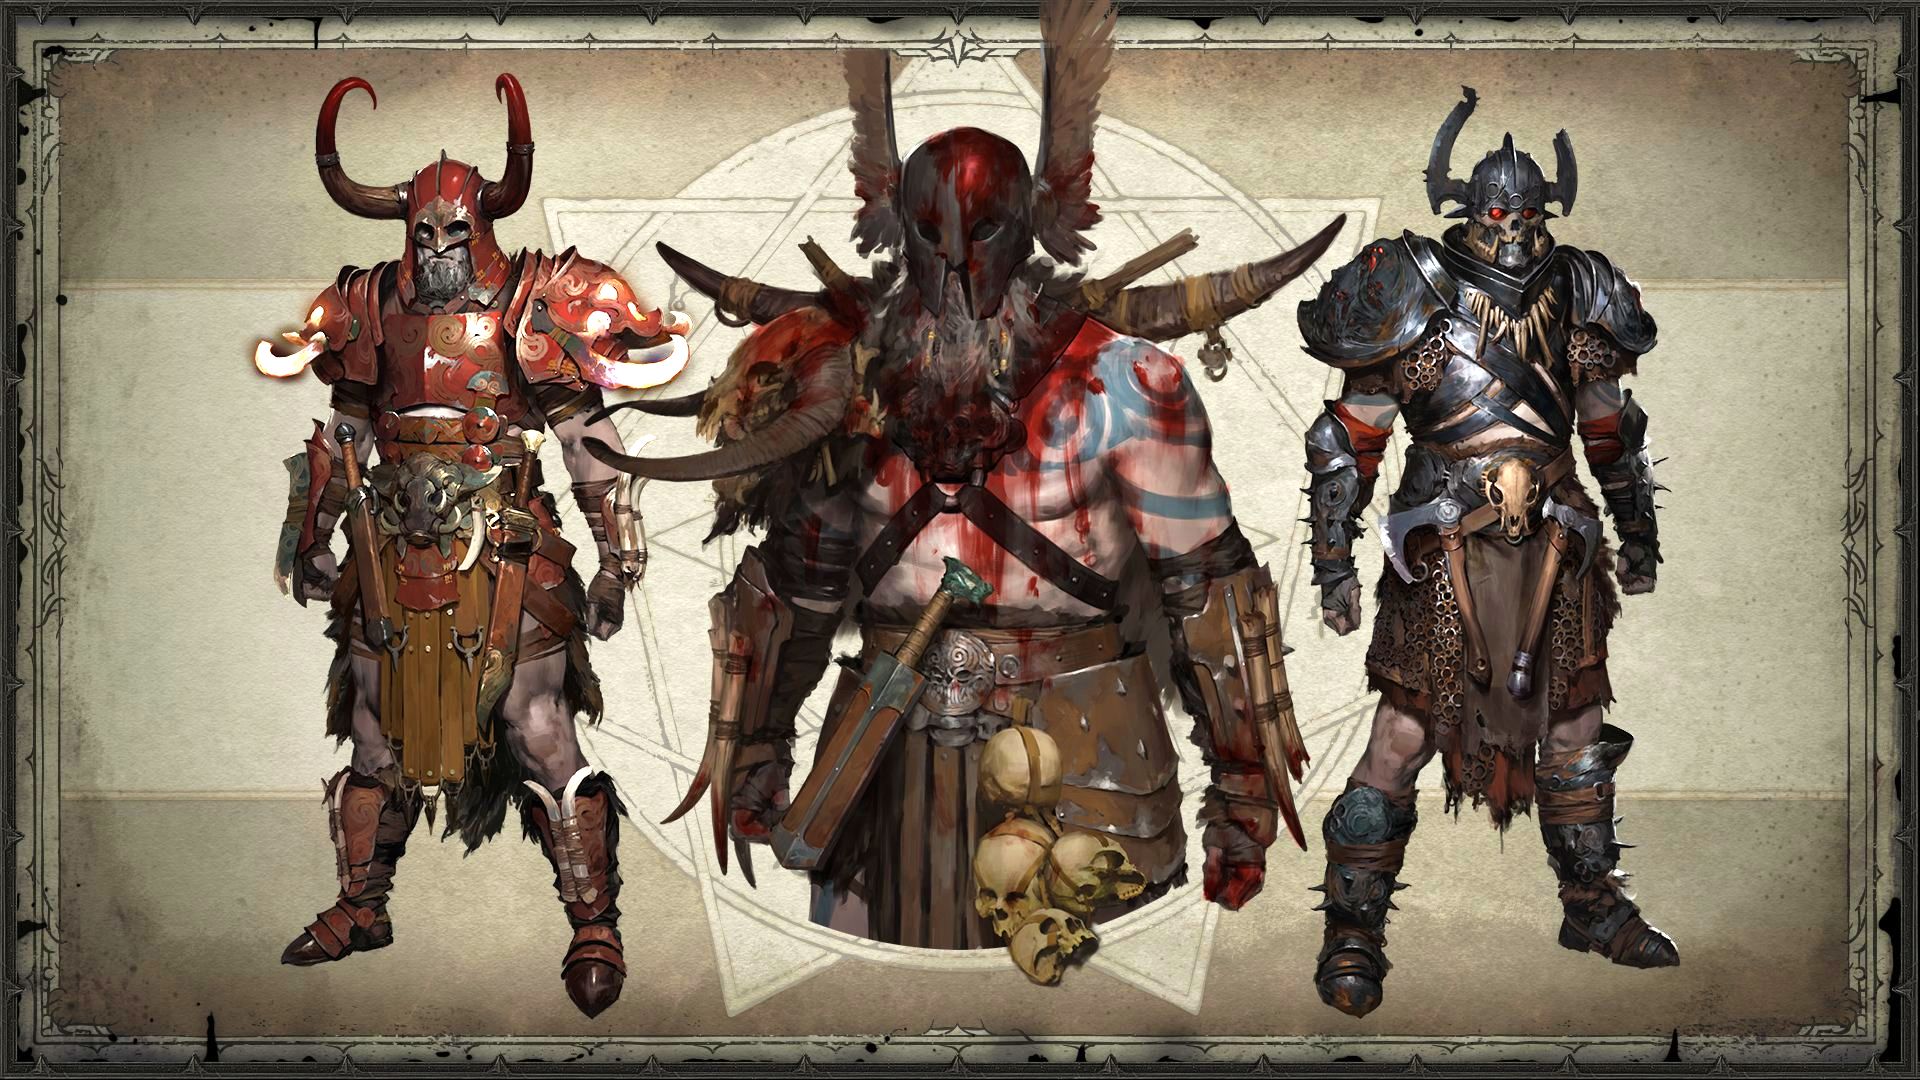 Diablo 4 Barbarian Collection: Concept art of armor and gear created before the Diablo 4 beta, ranging from ornate armor to leather skins and bone gear.